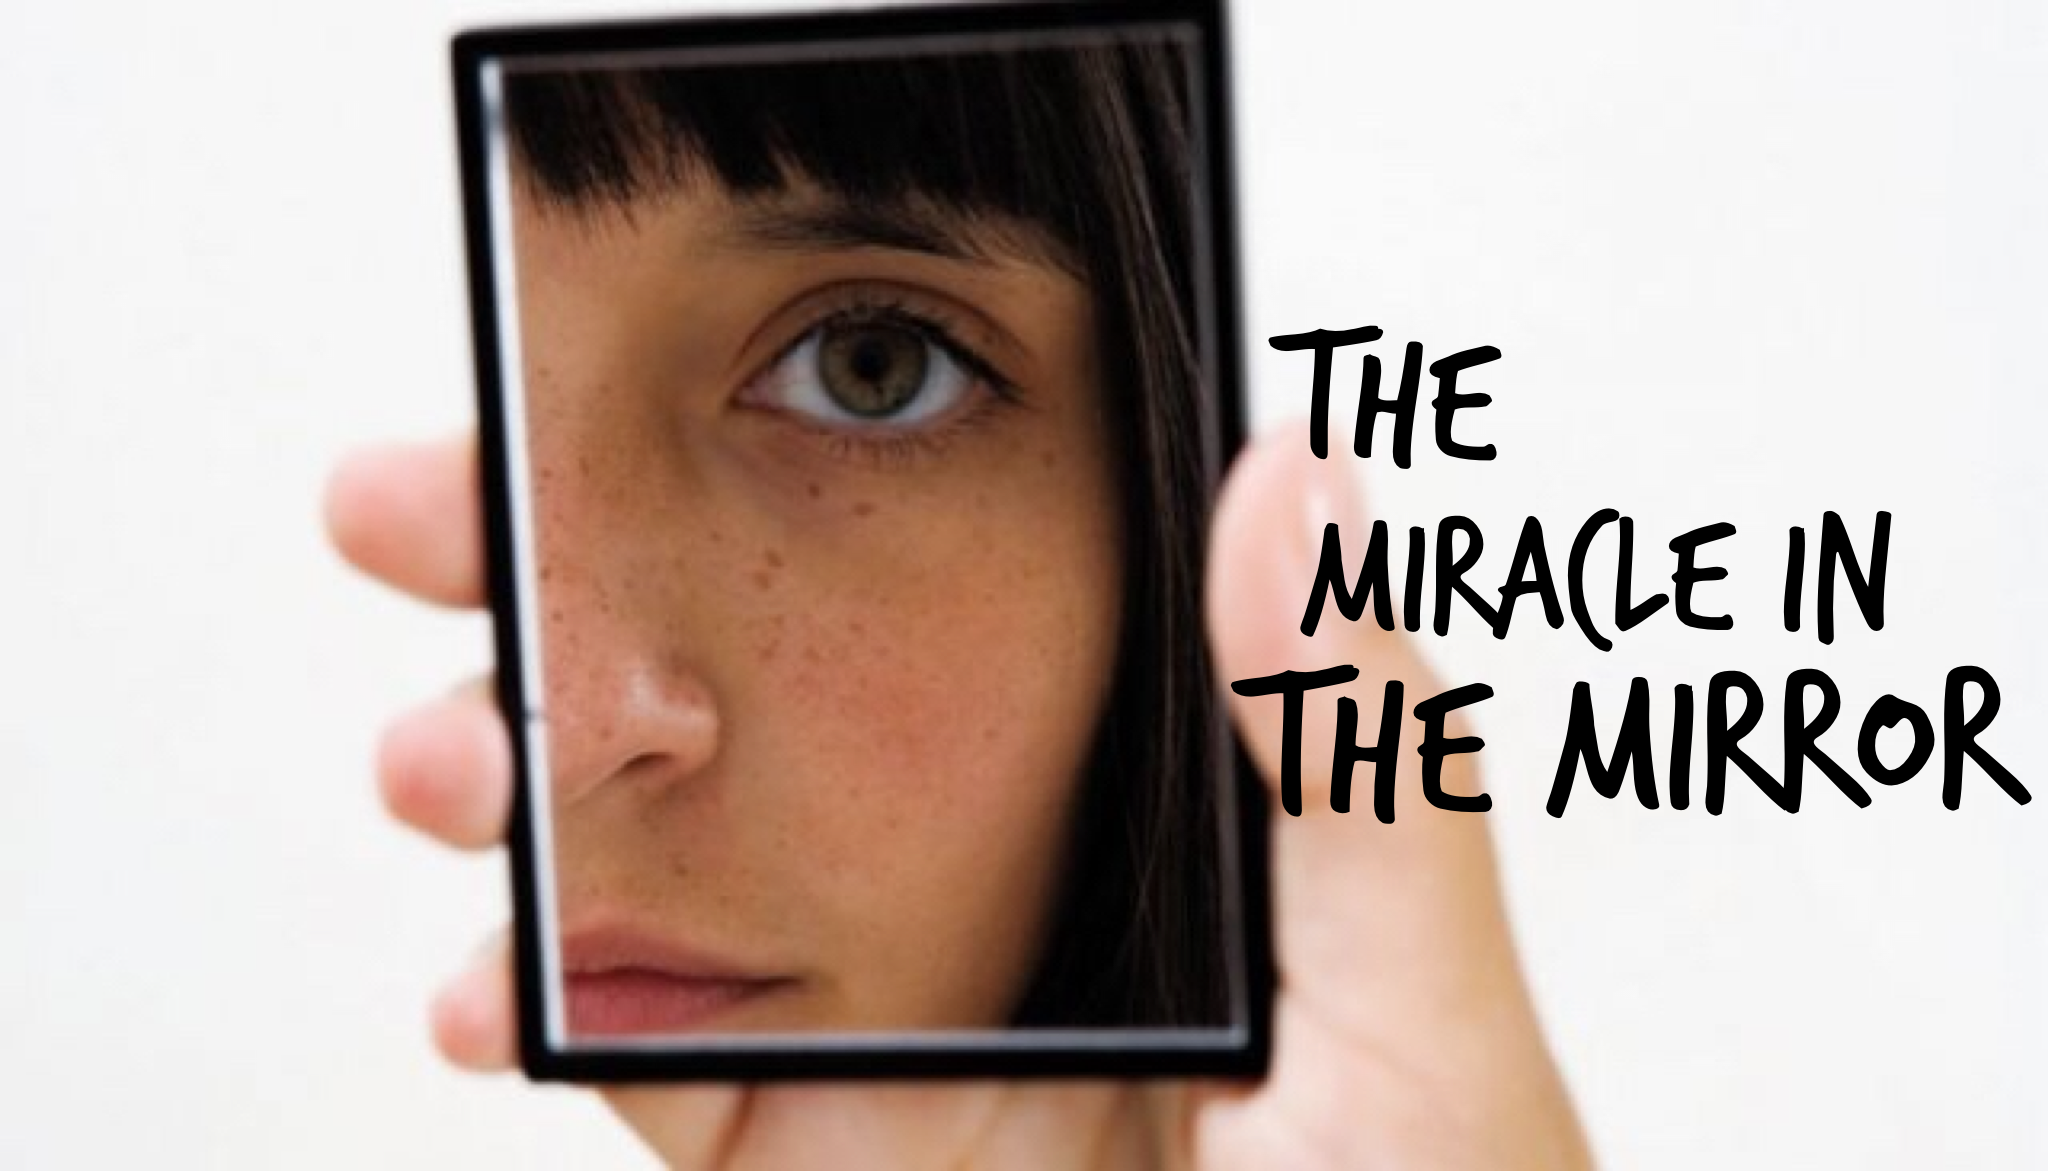 The Miracle in the Mirror